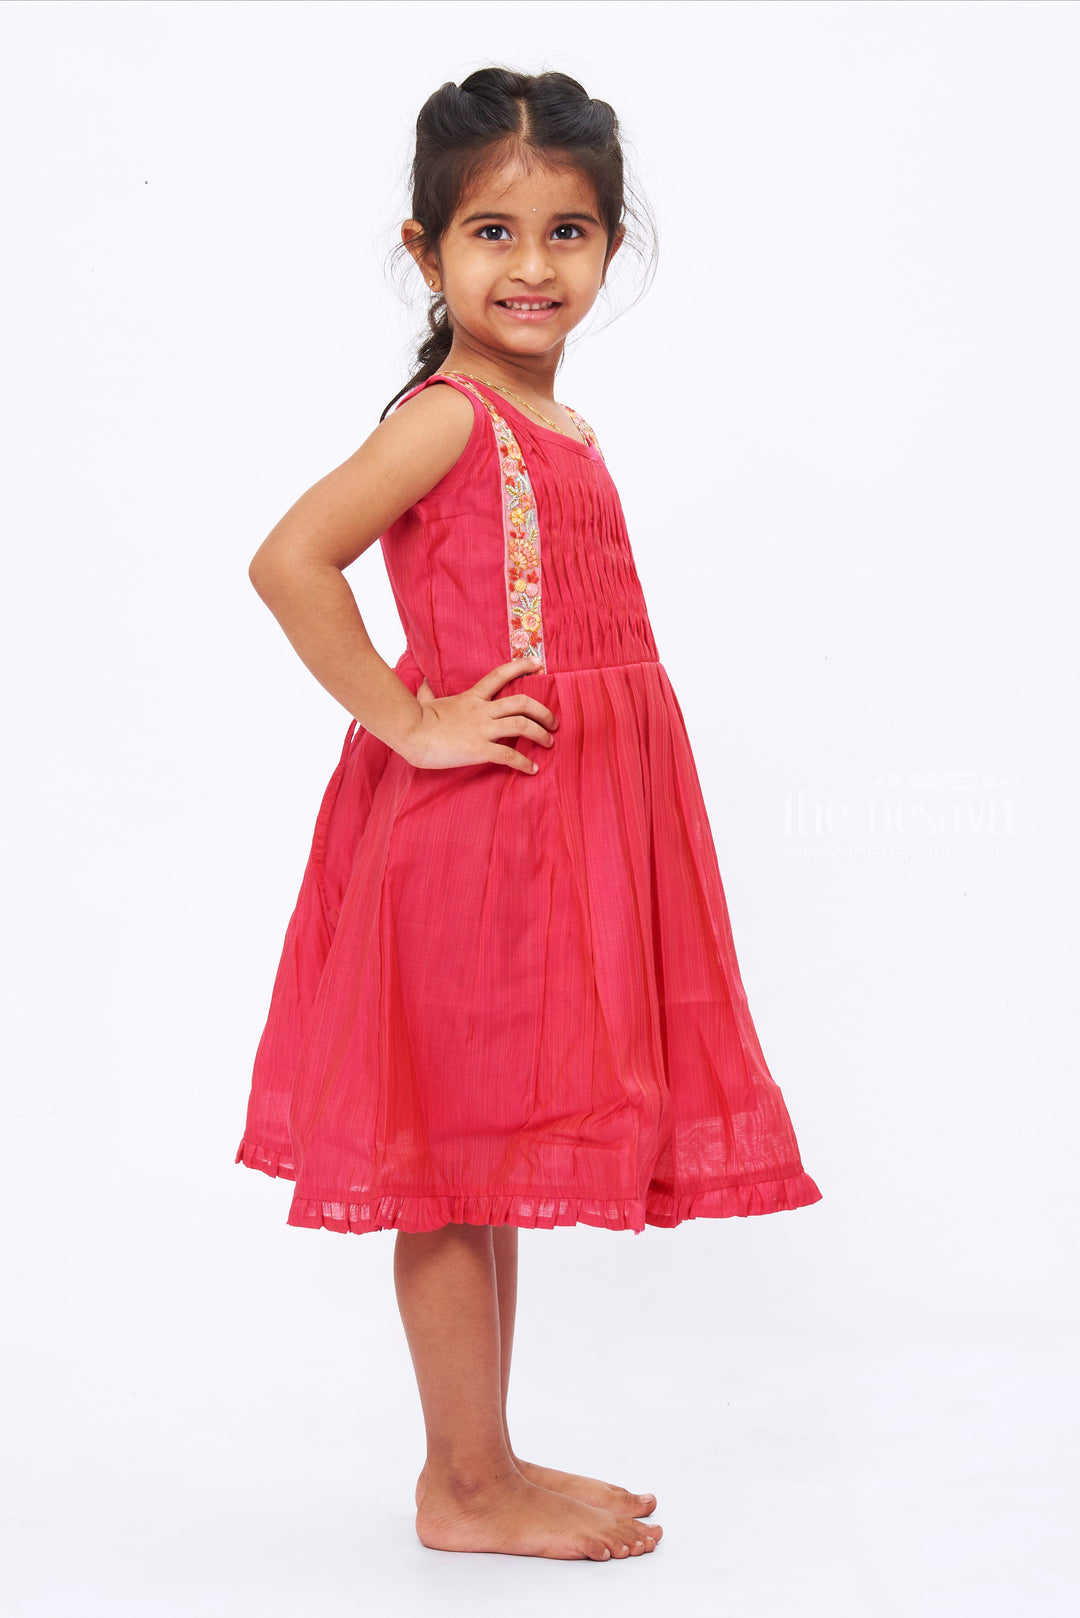 The Nesavu Girls Cotton Frock Pink Blossom Girls Cotton Frock: Floral Embroidery & Pleated Design Nesavu Pink Floral Cotton Frock for Girls | Summer Comfort Daily Wear | The Nesavu